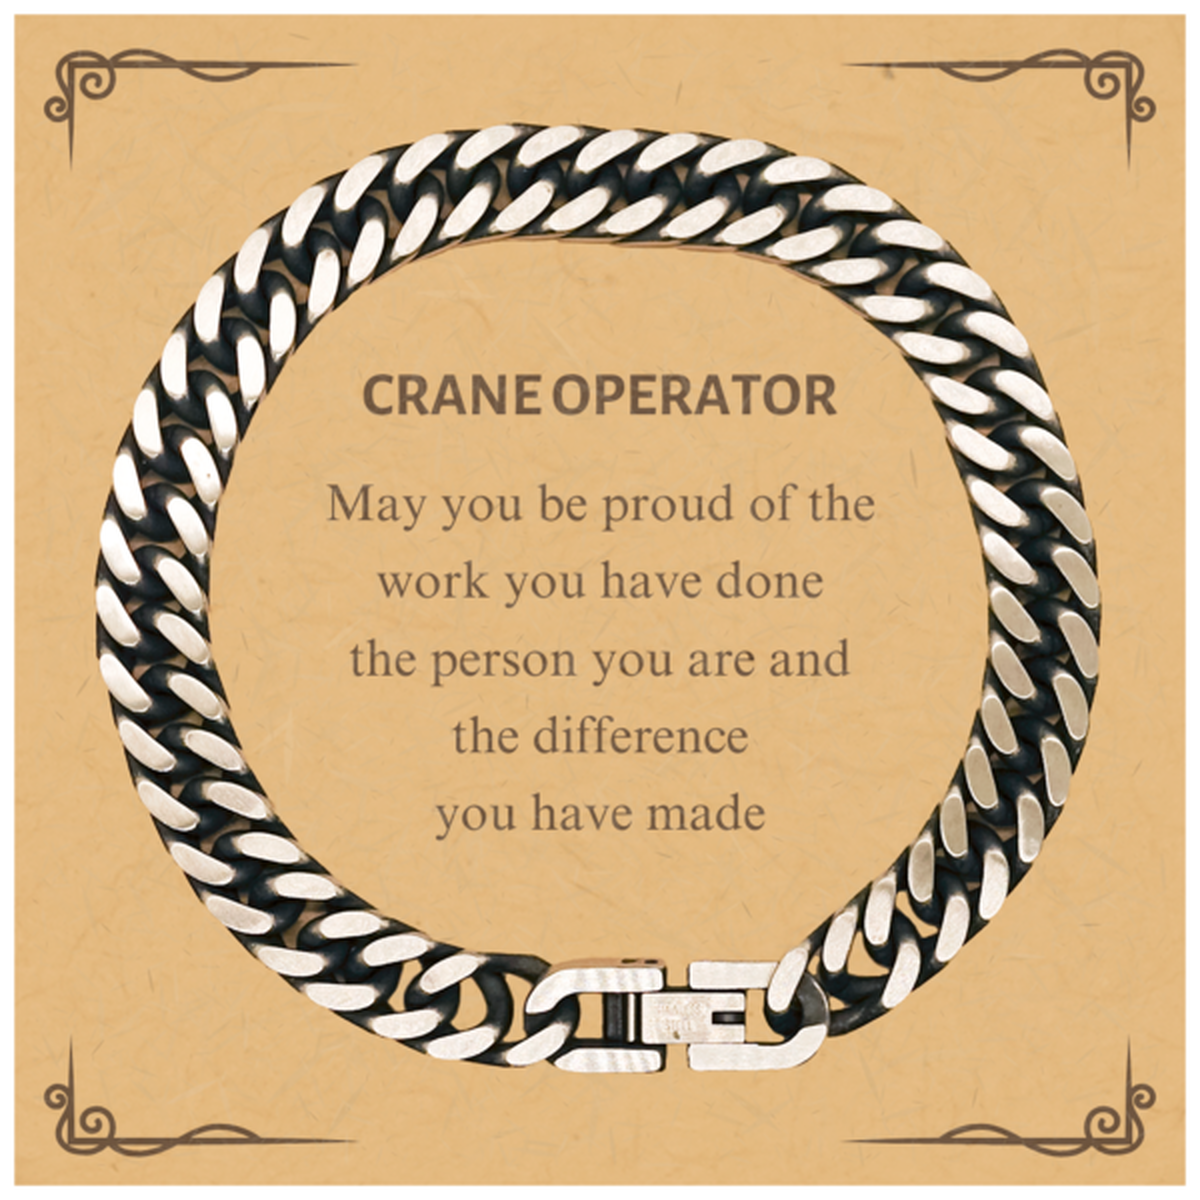 Crane Operator May you be proud of the work you have done, Retirement Crane Operator Cuban Link Chain Bracelet for Colleague Appreciation Gifts Amazing for Crane Operator